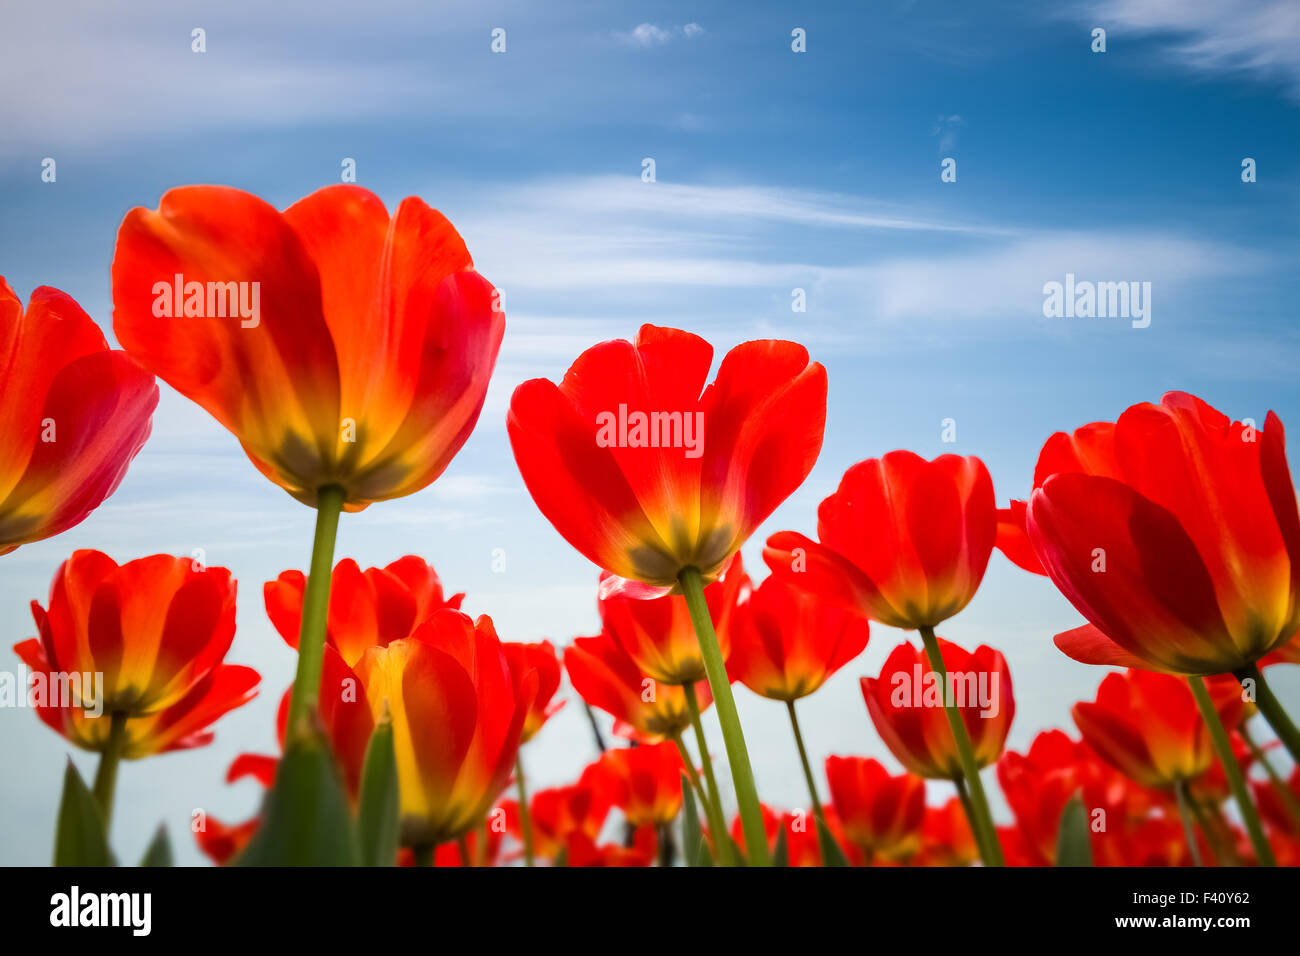 red tulips against a blue sky Stock Photo